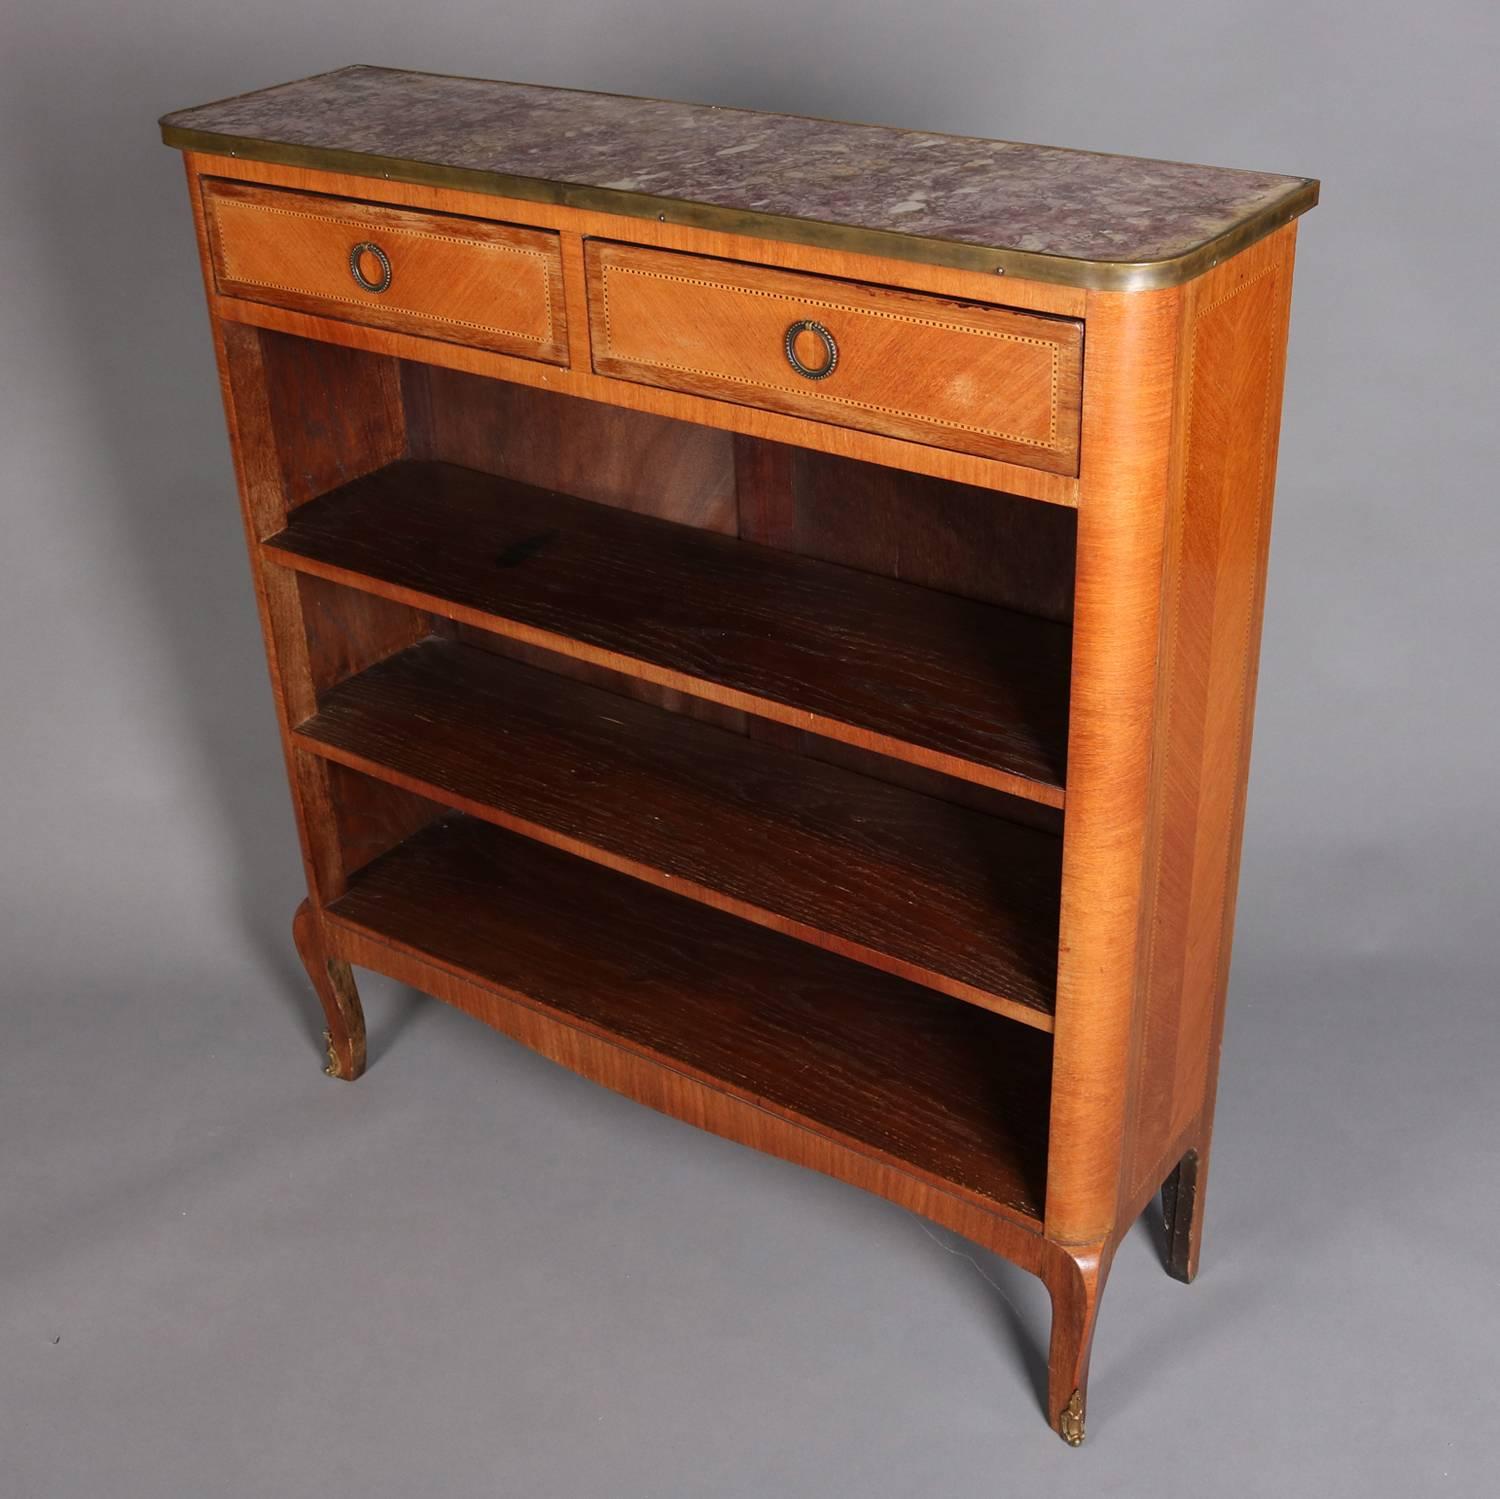 Vintage French mahogany open bookcase features inlaid banding, two drawers and three shelves, marble top, and seated on cabriole legs, 20th century

Measures - 38.5